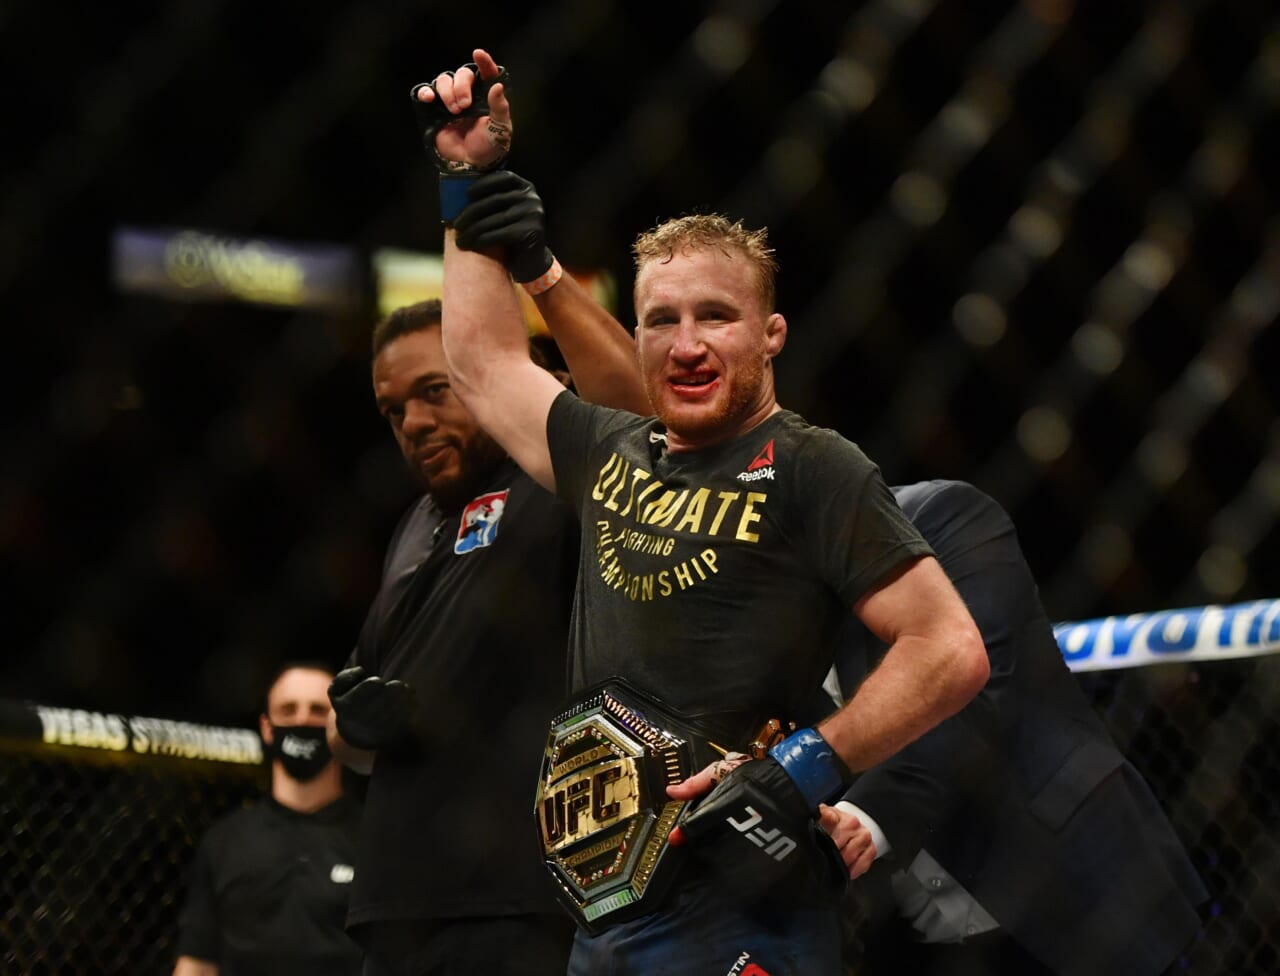 After UFC 268, Justin Gaethje is next in line for the lightweight championship